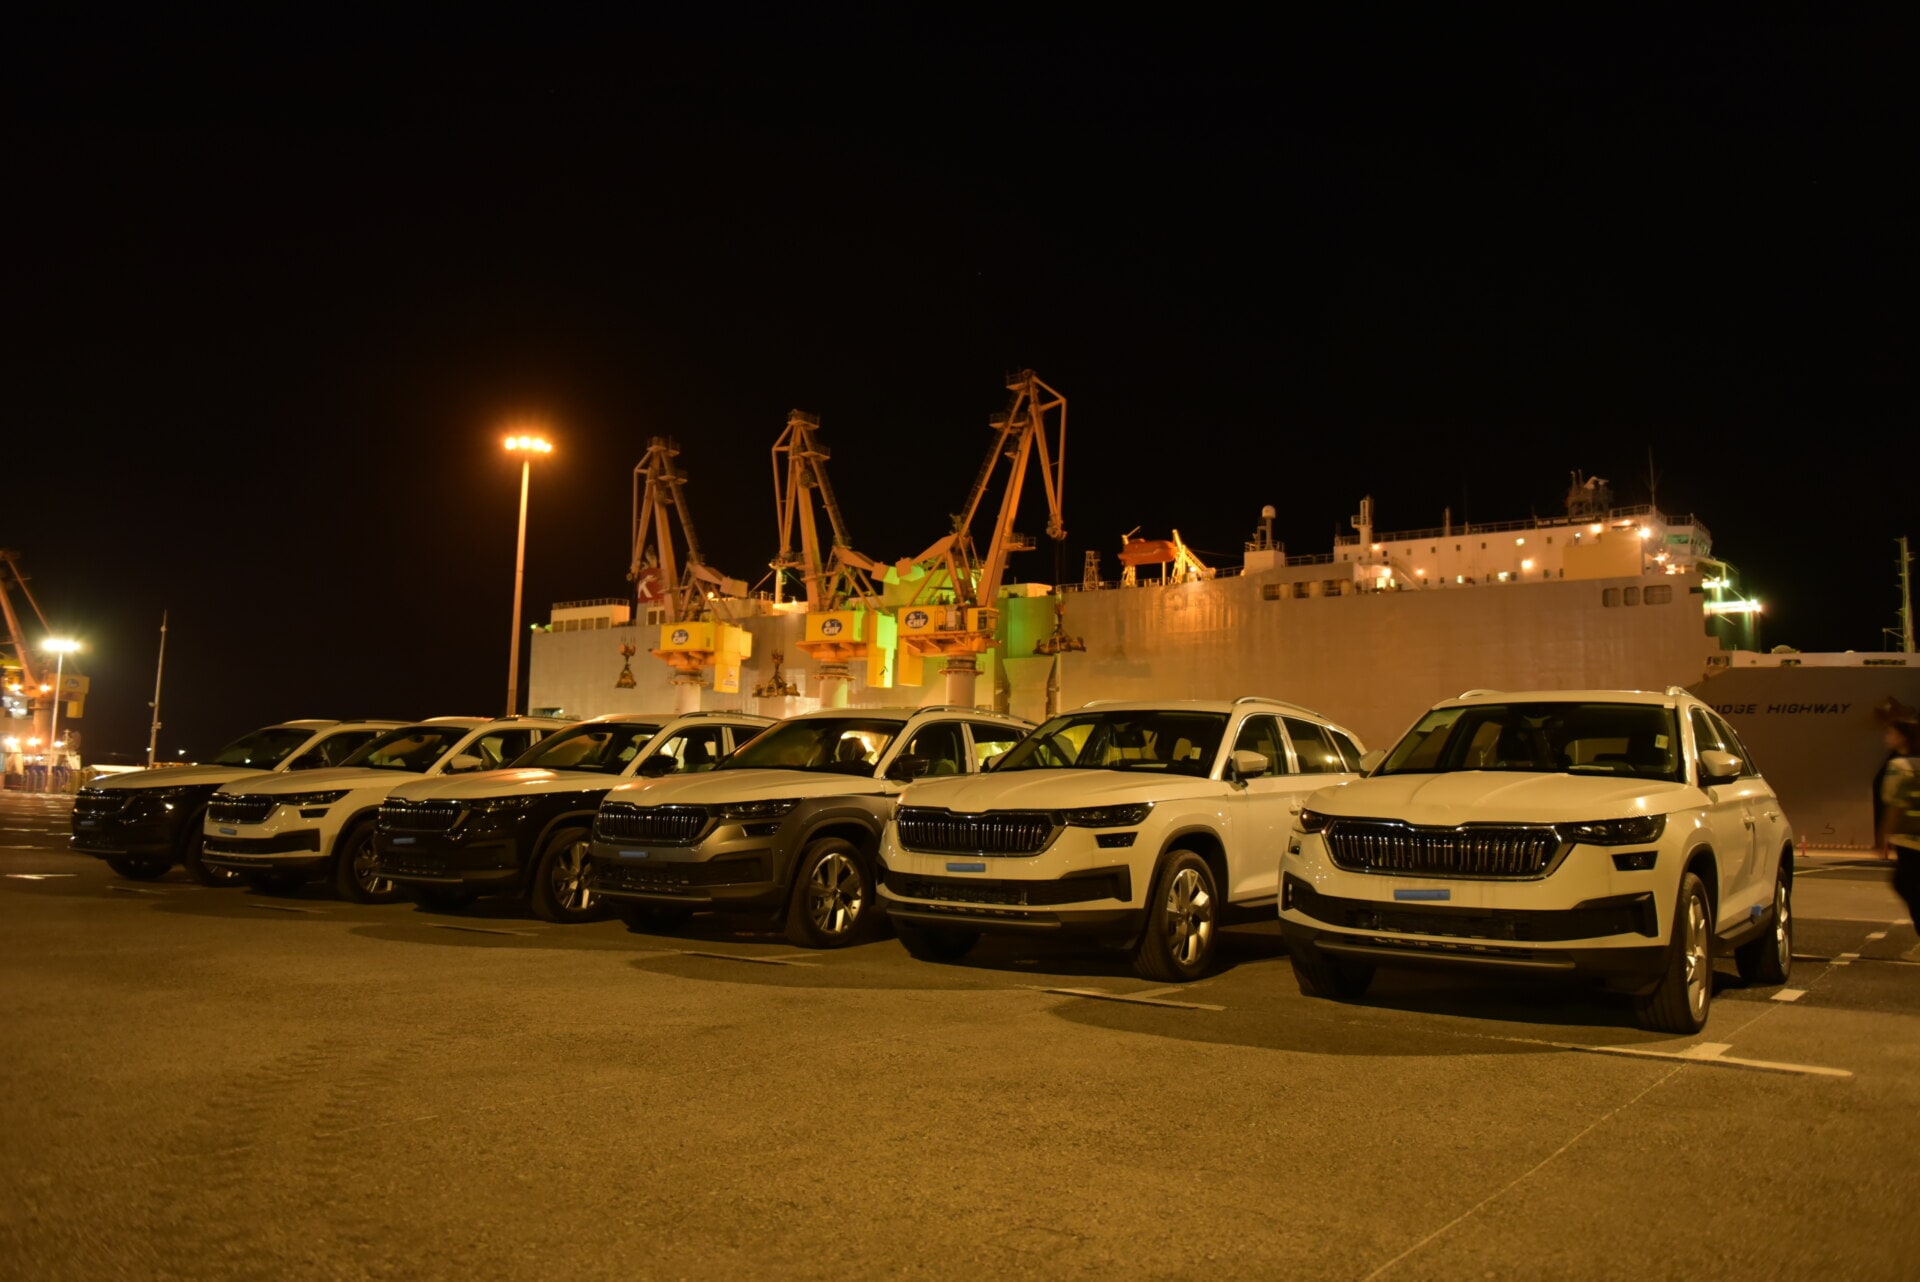 The Skoda Kodiaq and Karoq arrive in Vietnam as full imports from Europe